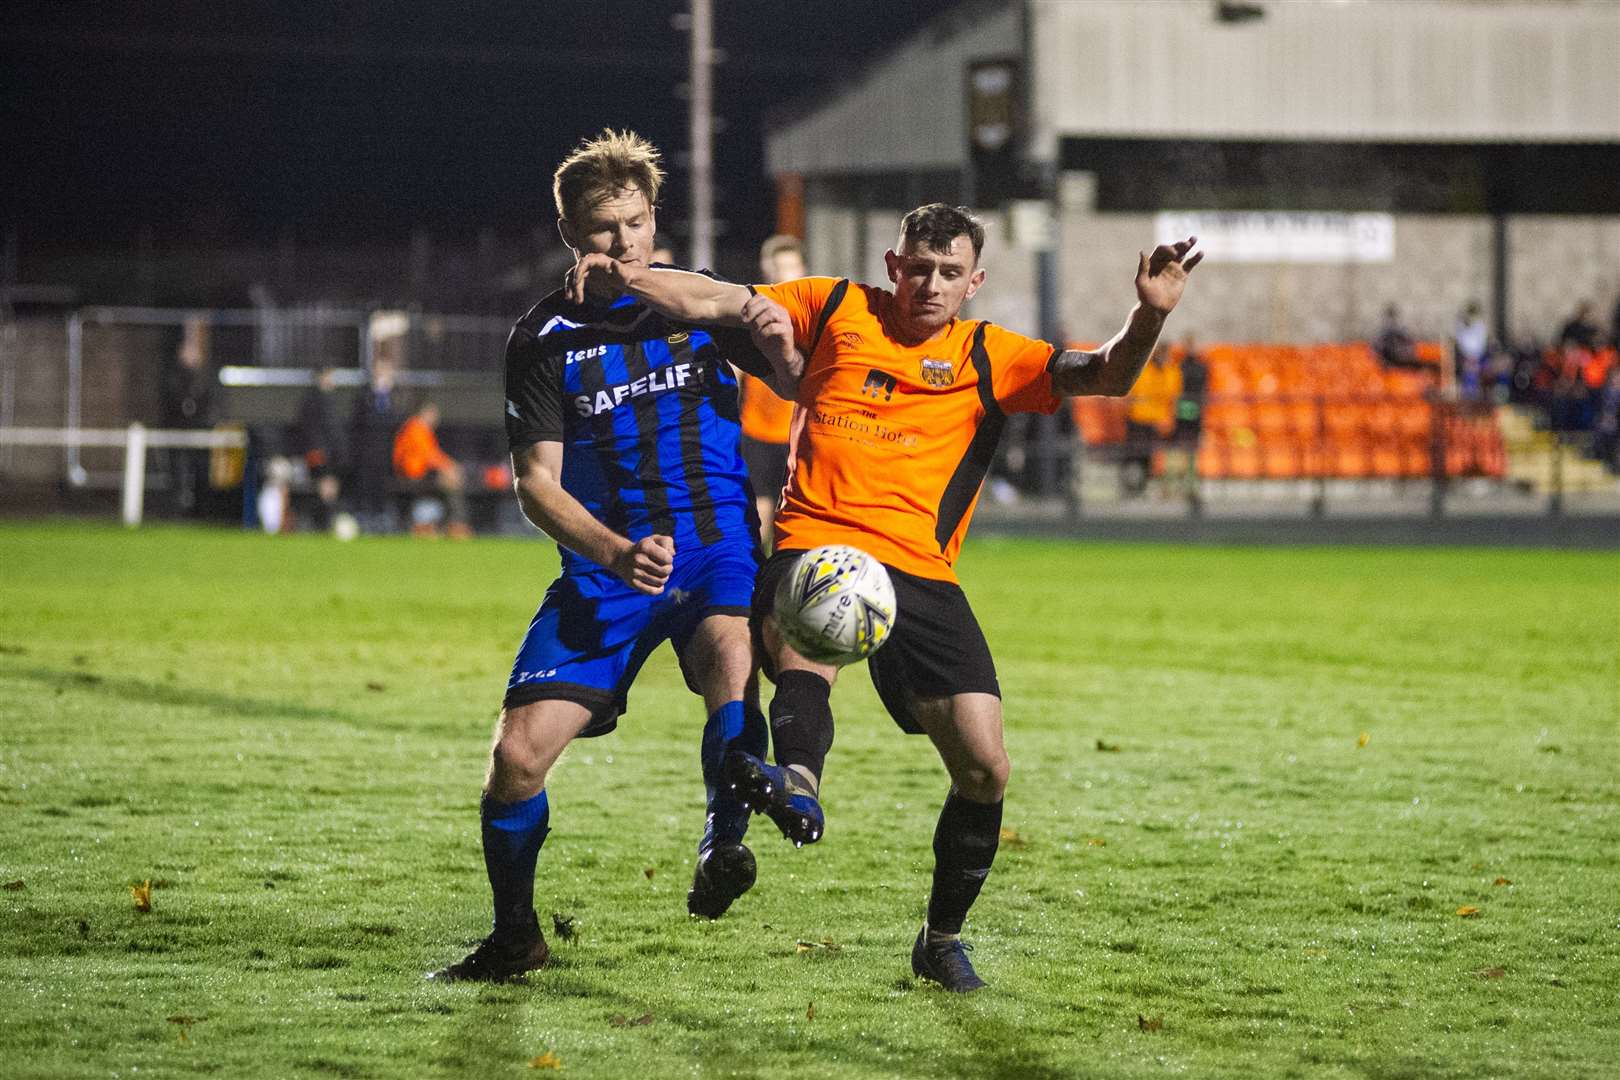 Huntly’s Highland League season got under way in November, but manager Allan Hale doubts it will now reach a conclusion. Photo: Daniel Forsyth.